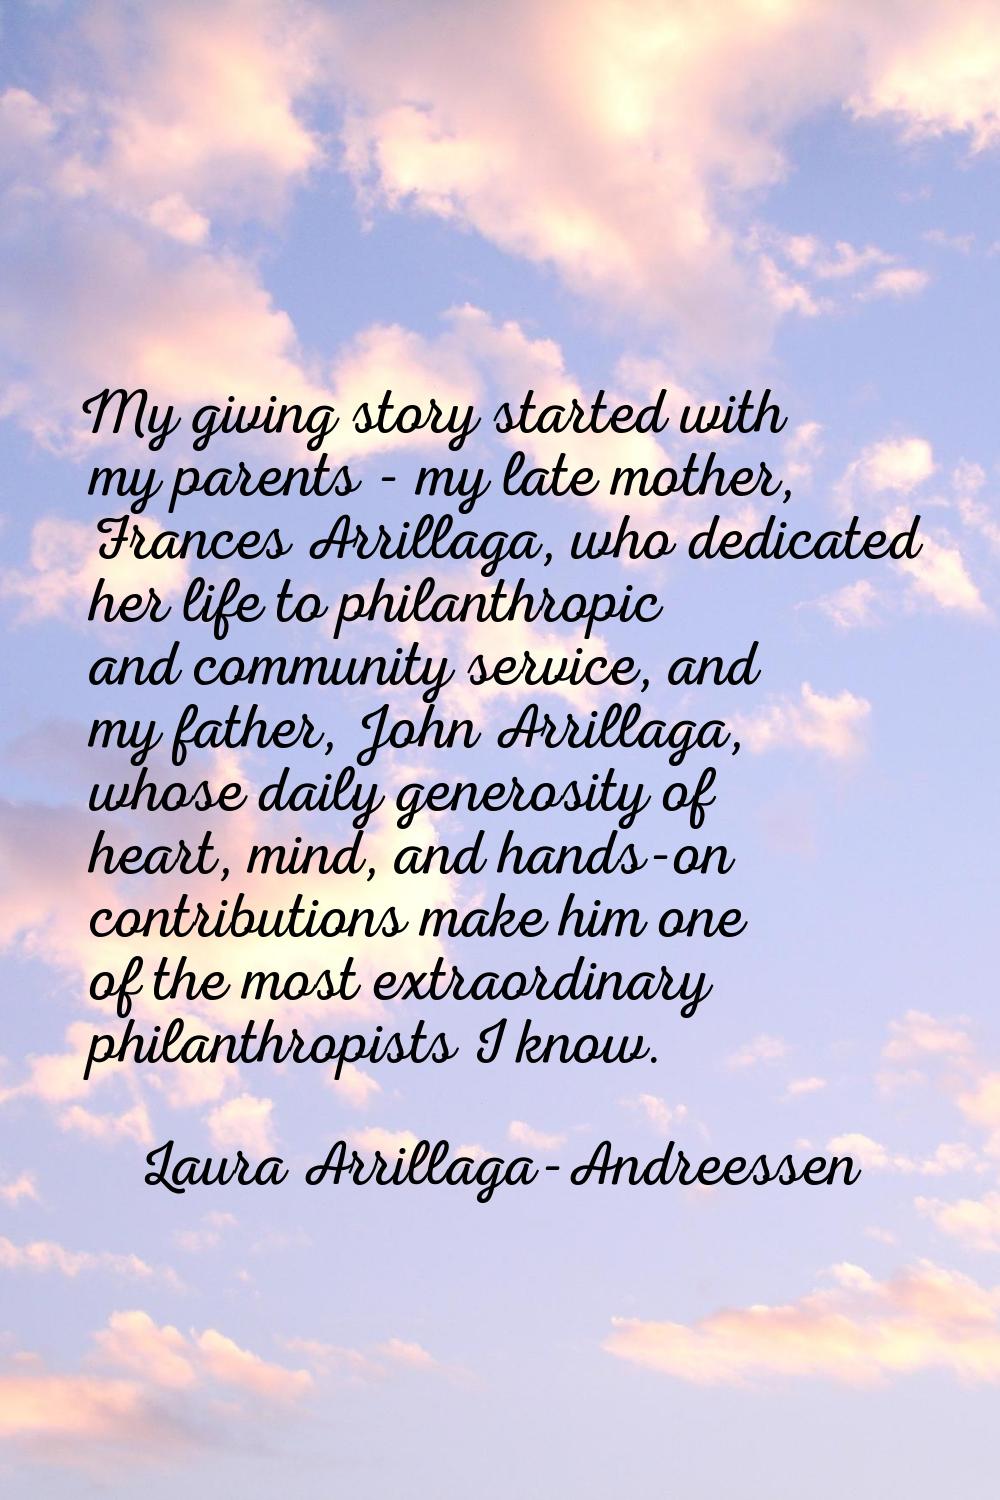 My giving story started with my parents - my late mother, Frances Arrillaga, who dedicated her life